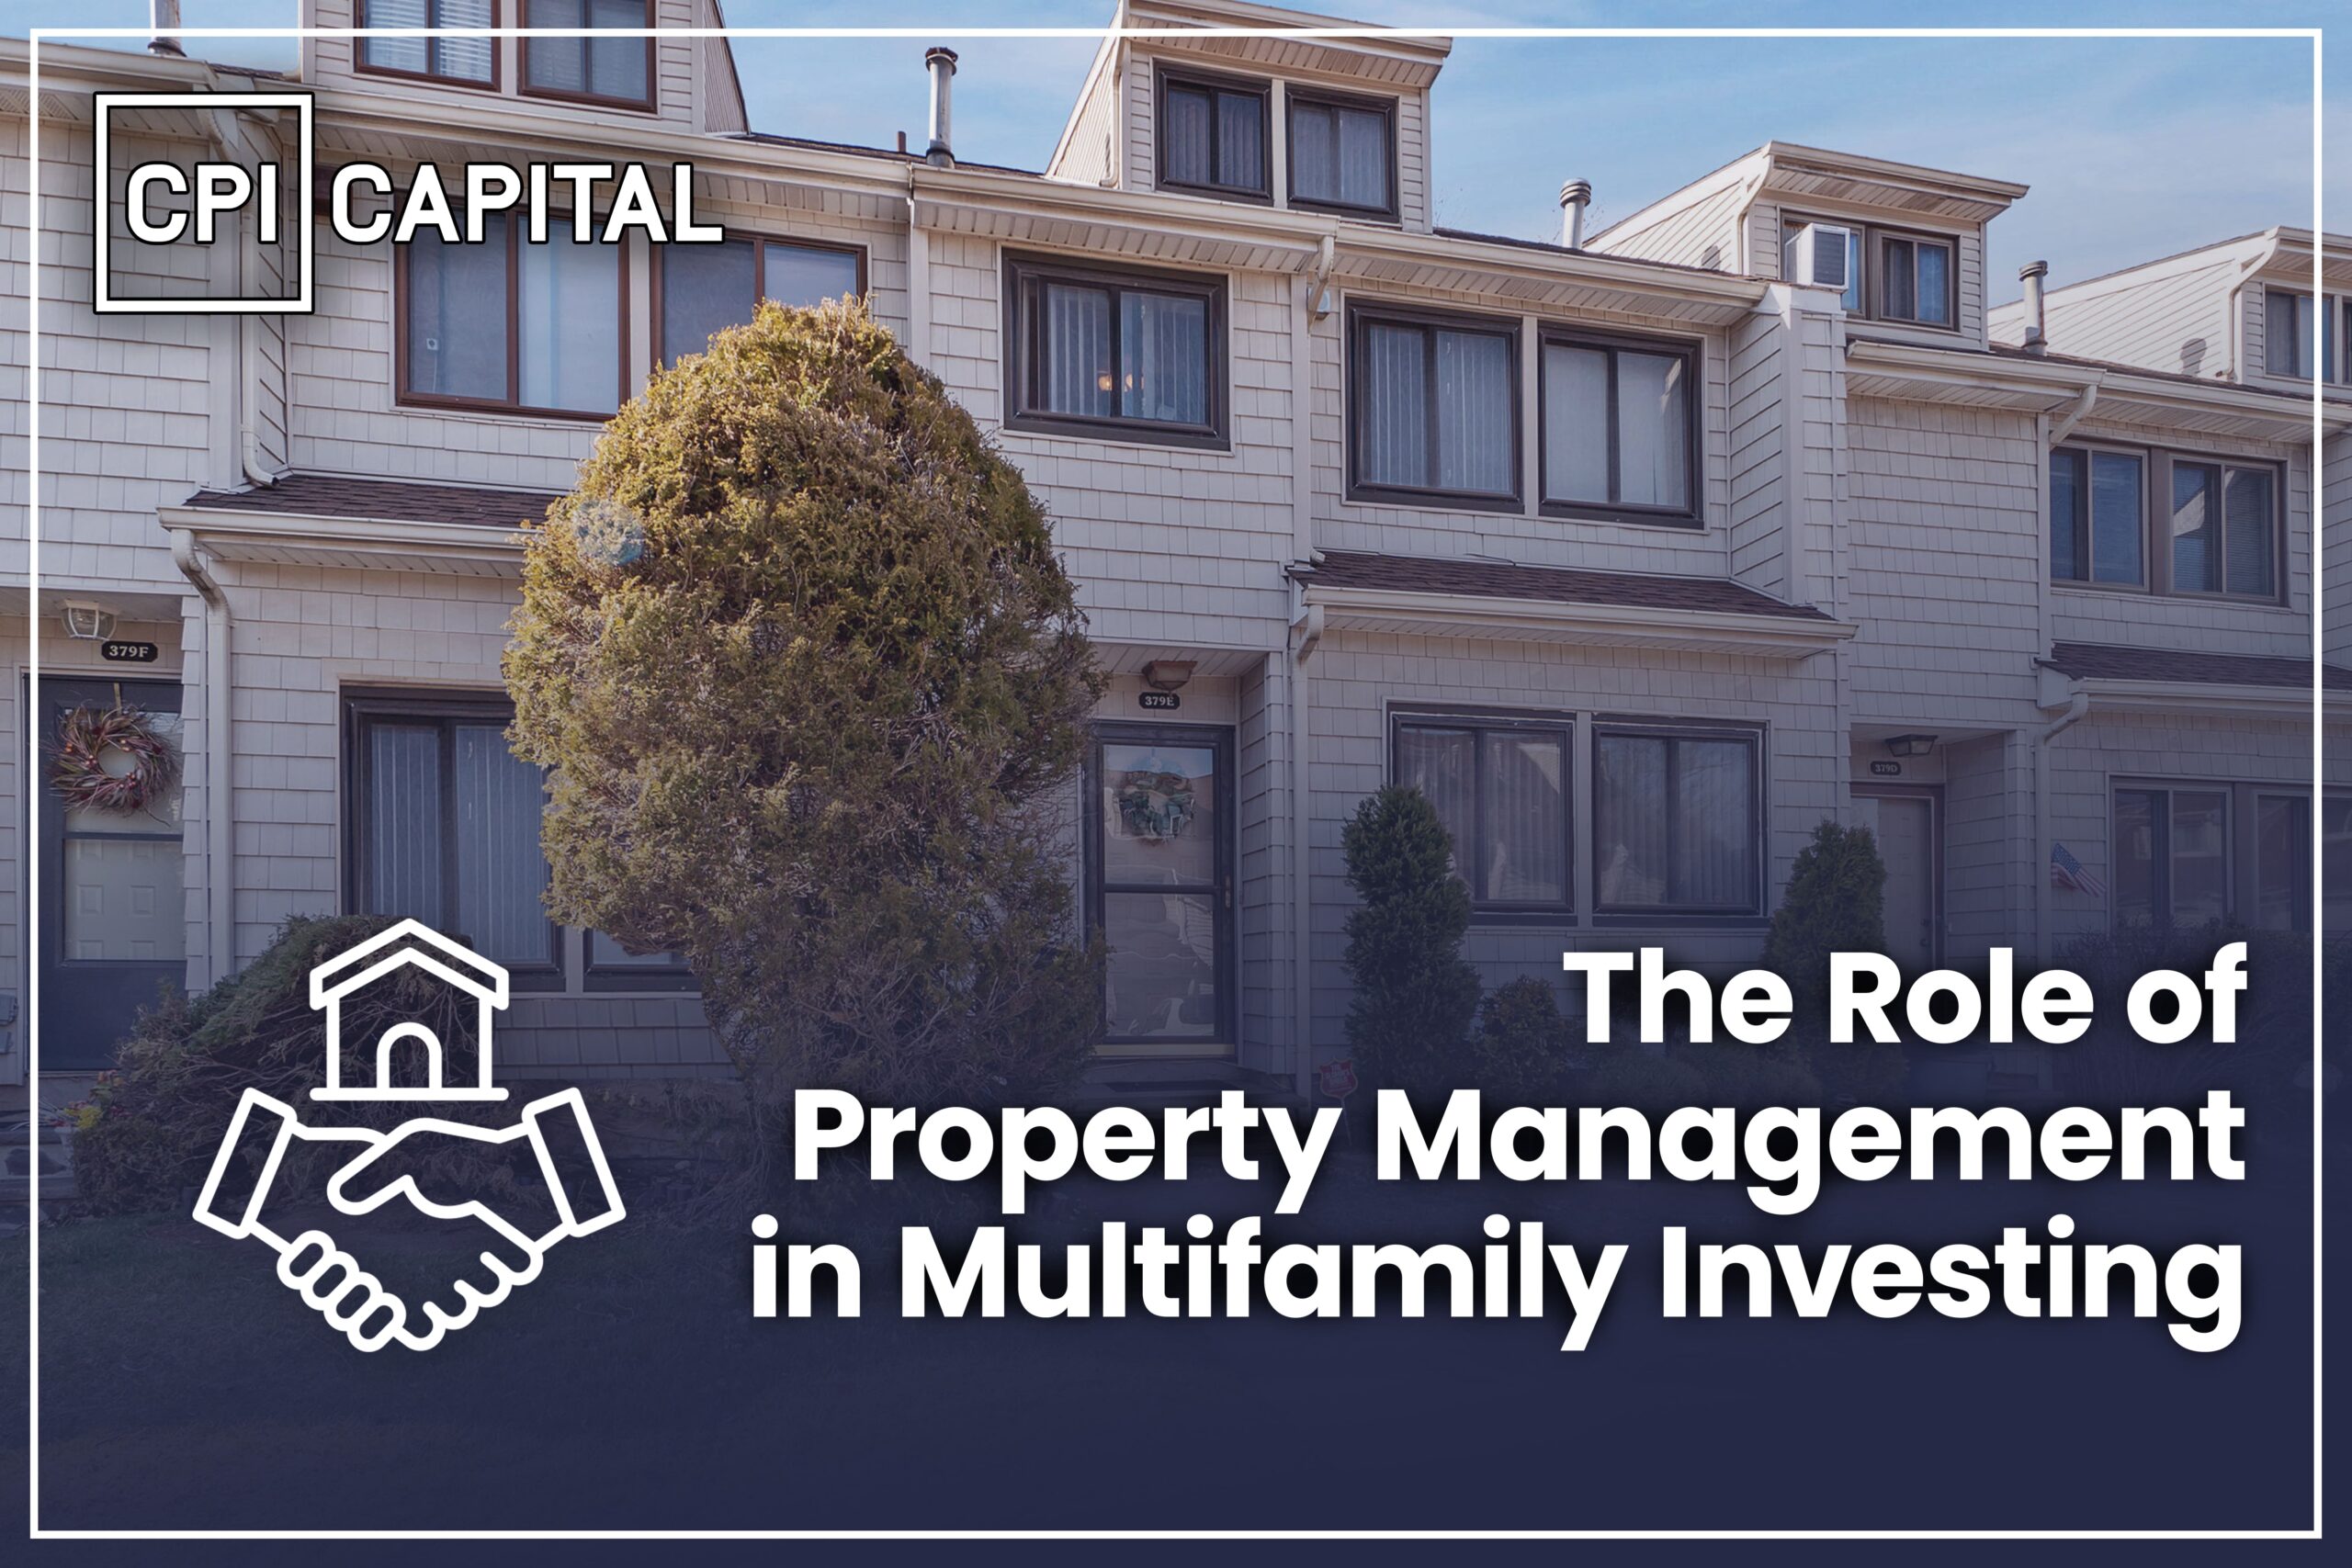 The Role of Property Management in Multifamily Investing.